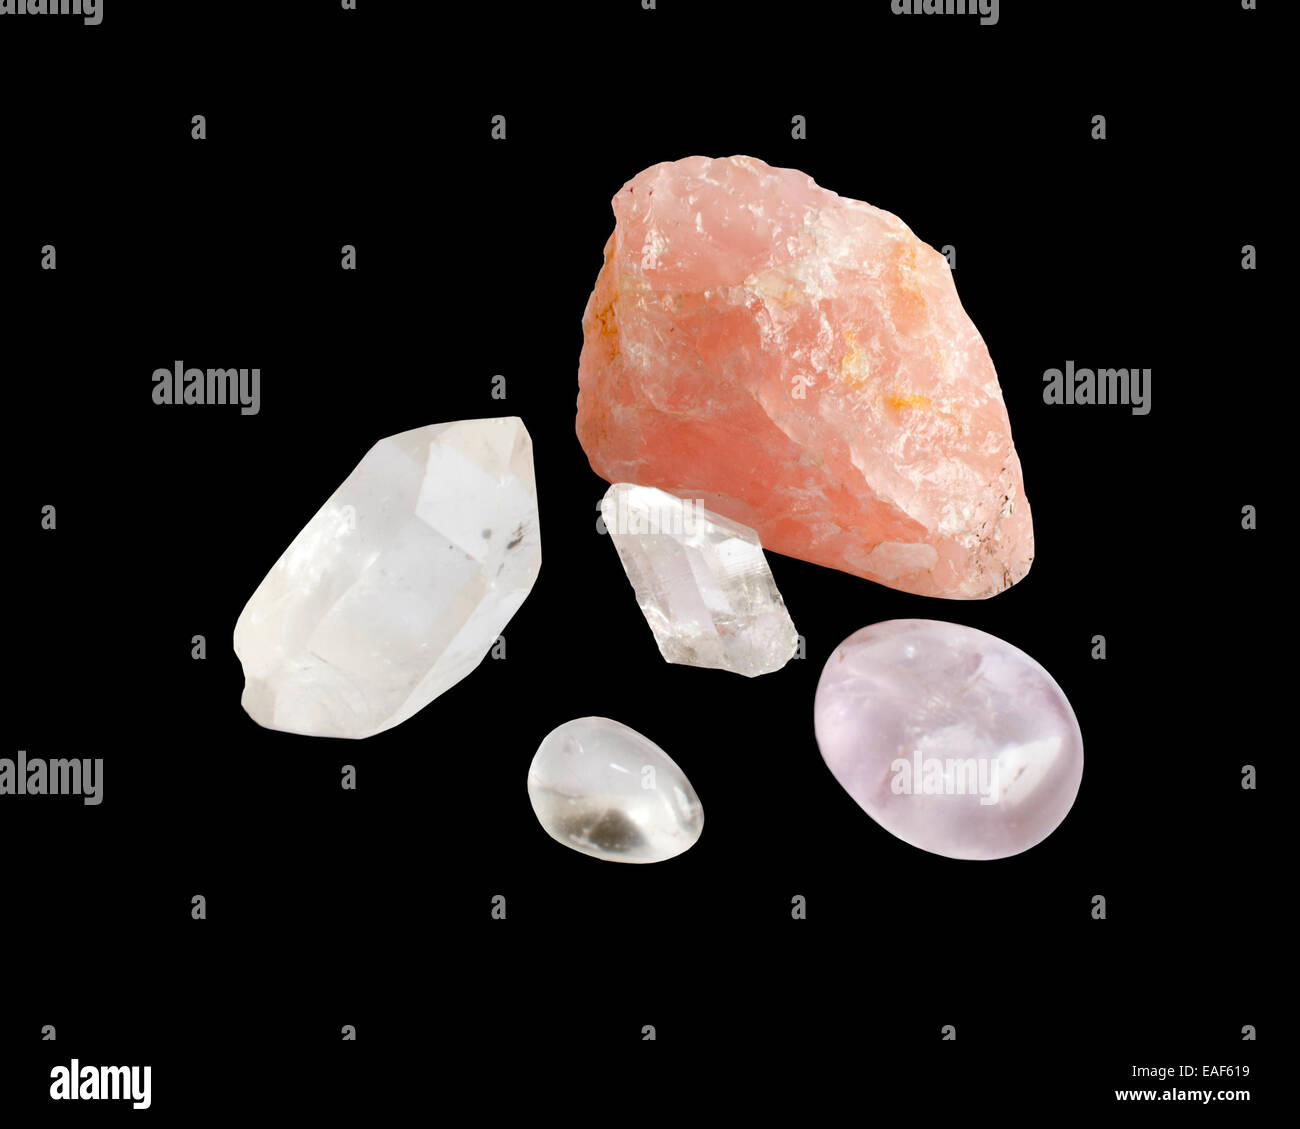 Rose Quartz And Healing Crystals Stock Photo - Download Image Now